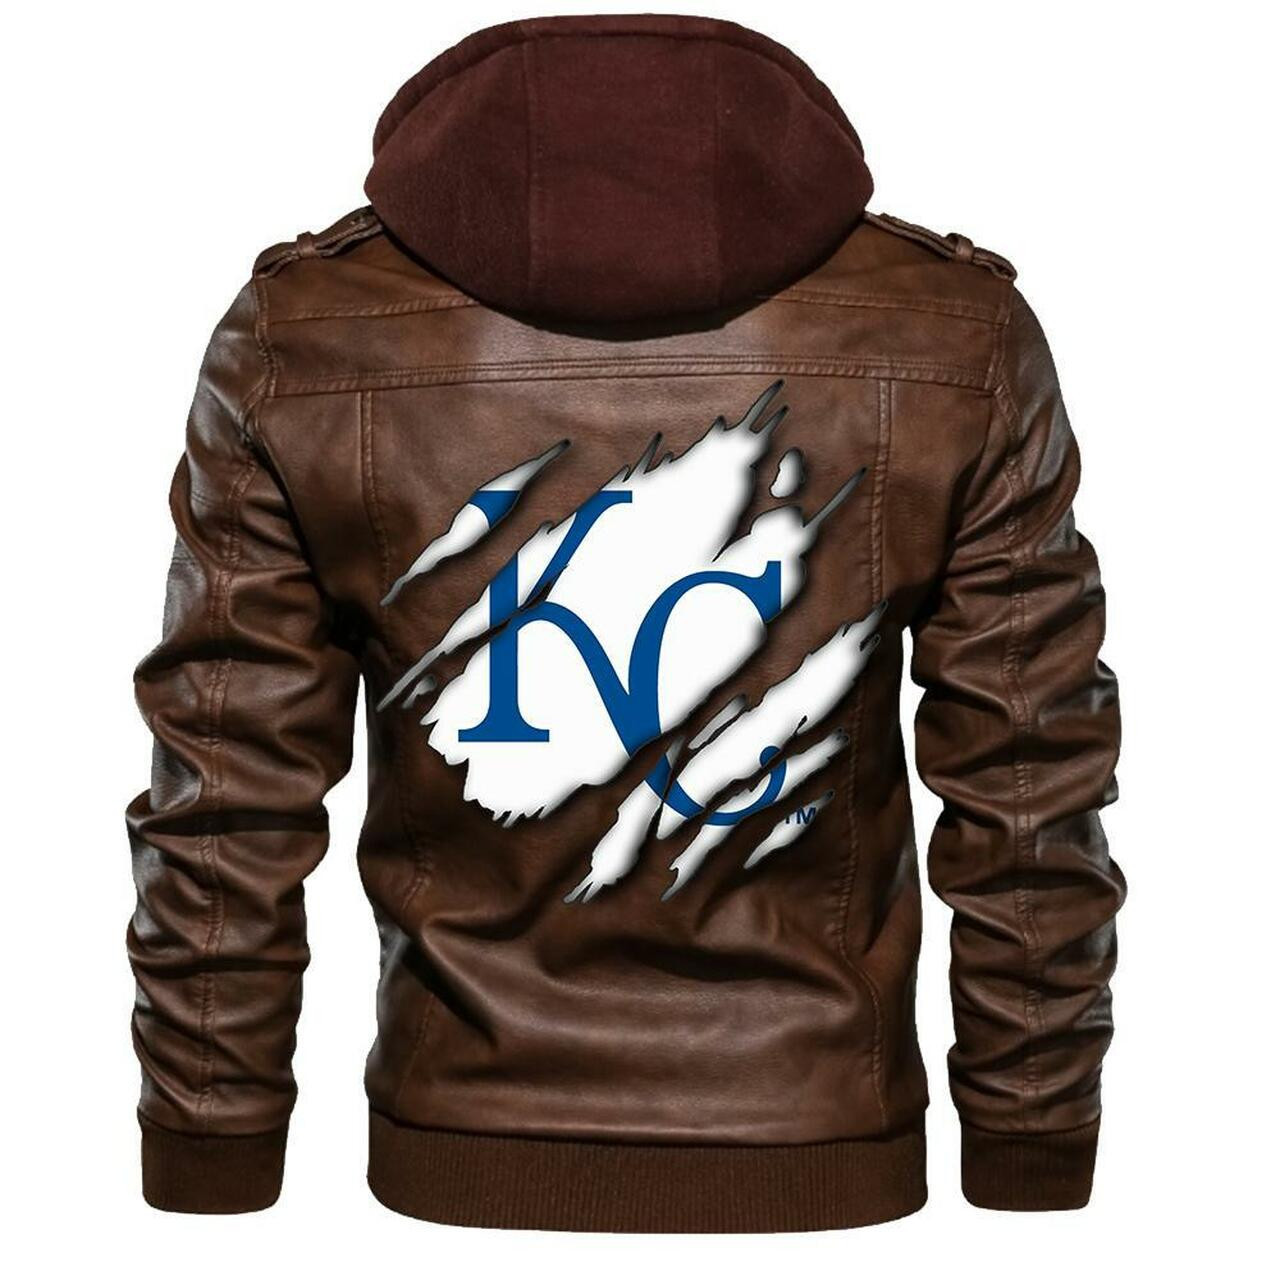 If you're looking for a new leather jacket this season - keep reading! 309